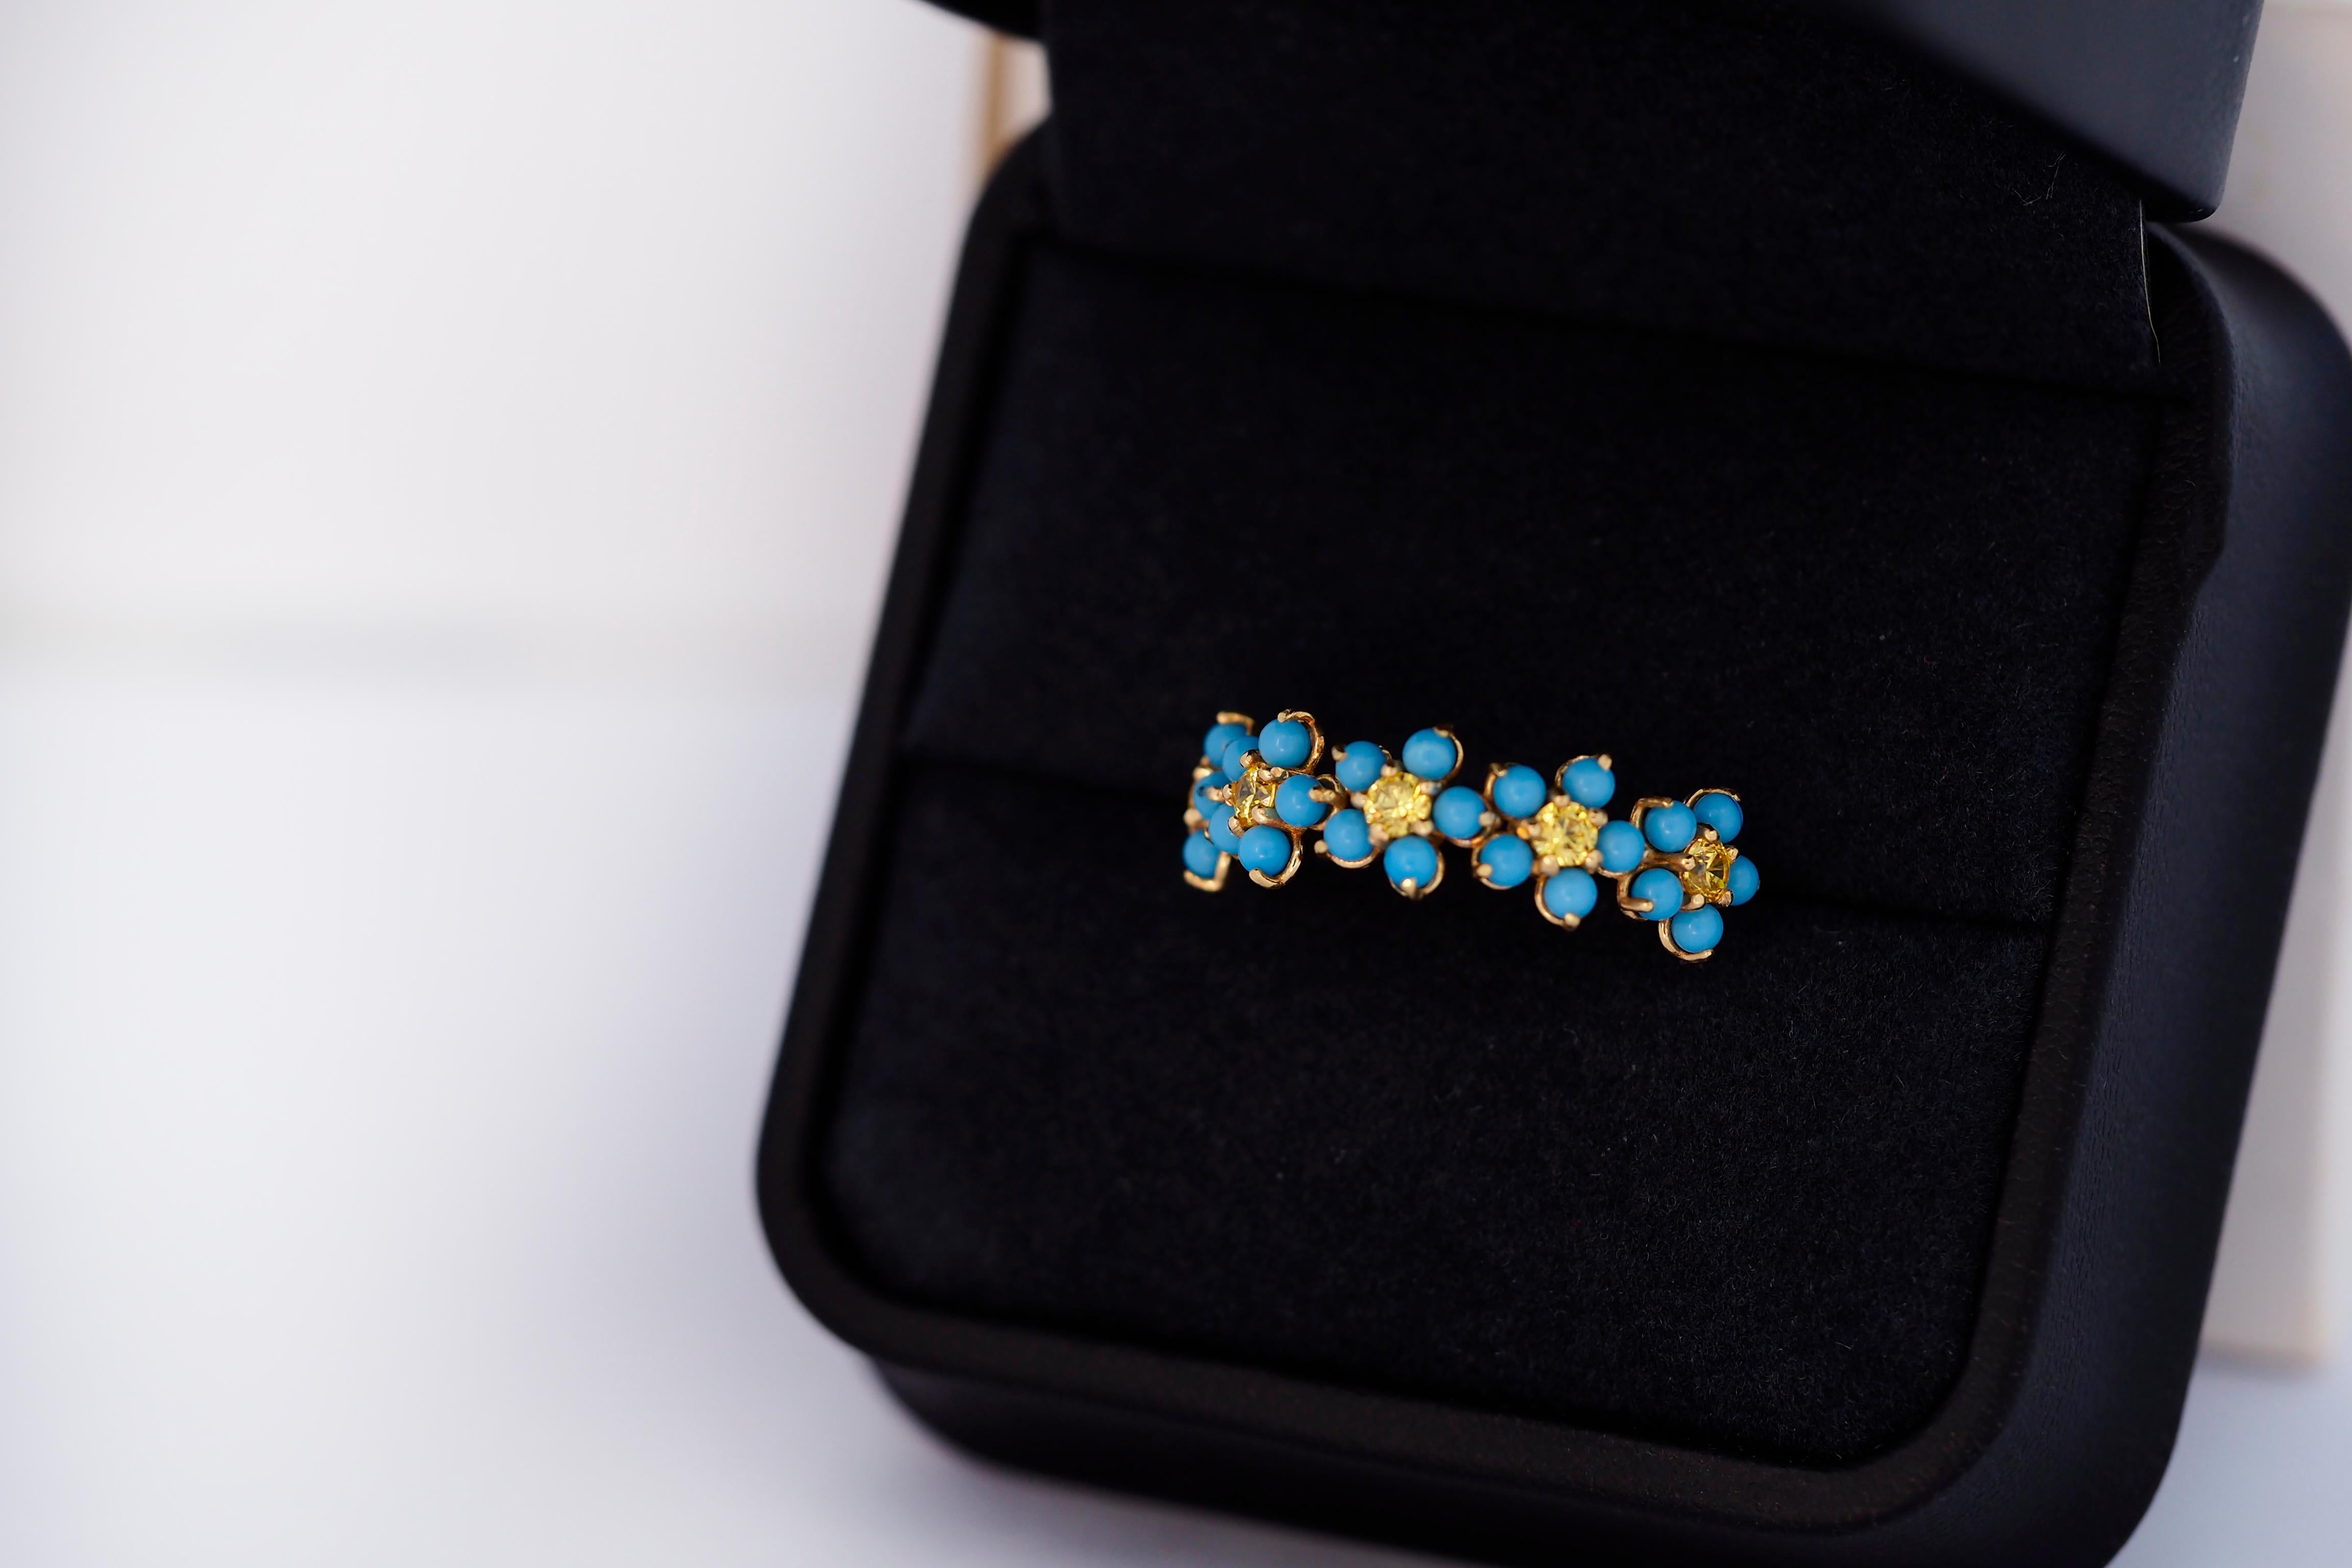 Forget me knot flower 14k gold ring. Five blue petal flower gold ring. Nature inspired ring with turquose and lab sapphire. Lucky flower ring.

Metal: 14k gold
Weight: 2.2 gr depends from size.

Gemstones:
Turquoses: natural treated, round cabochon